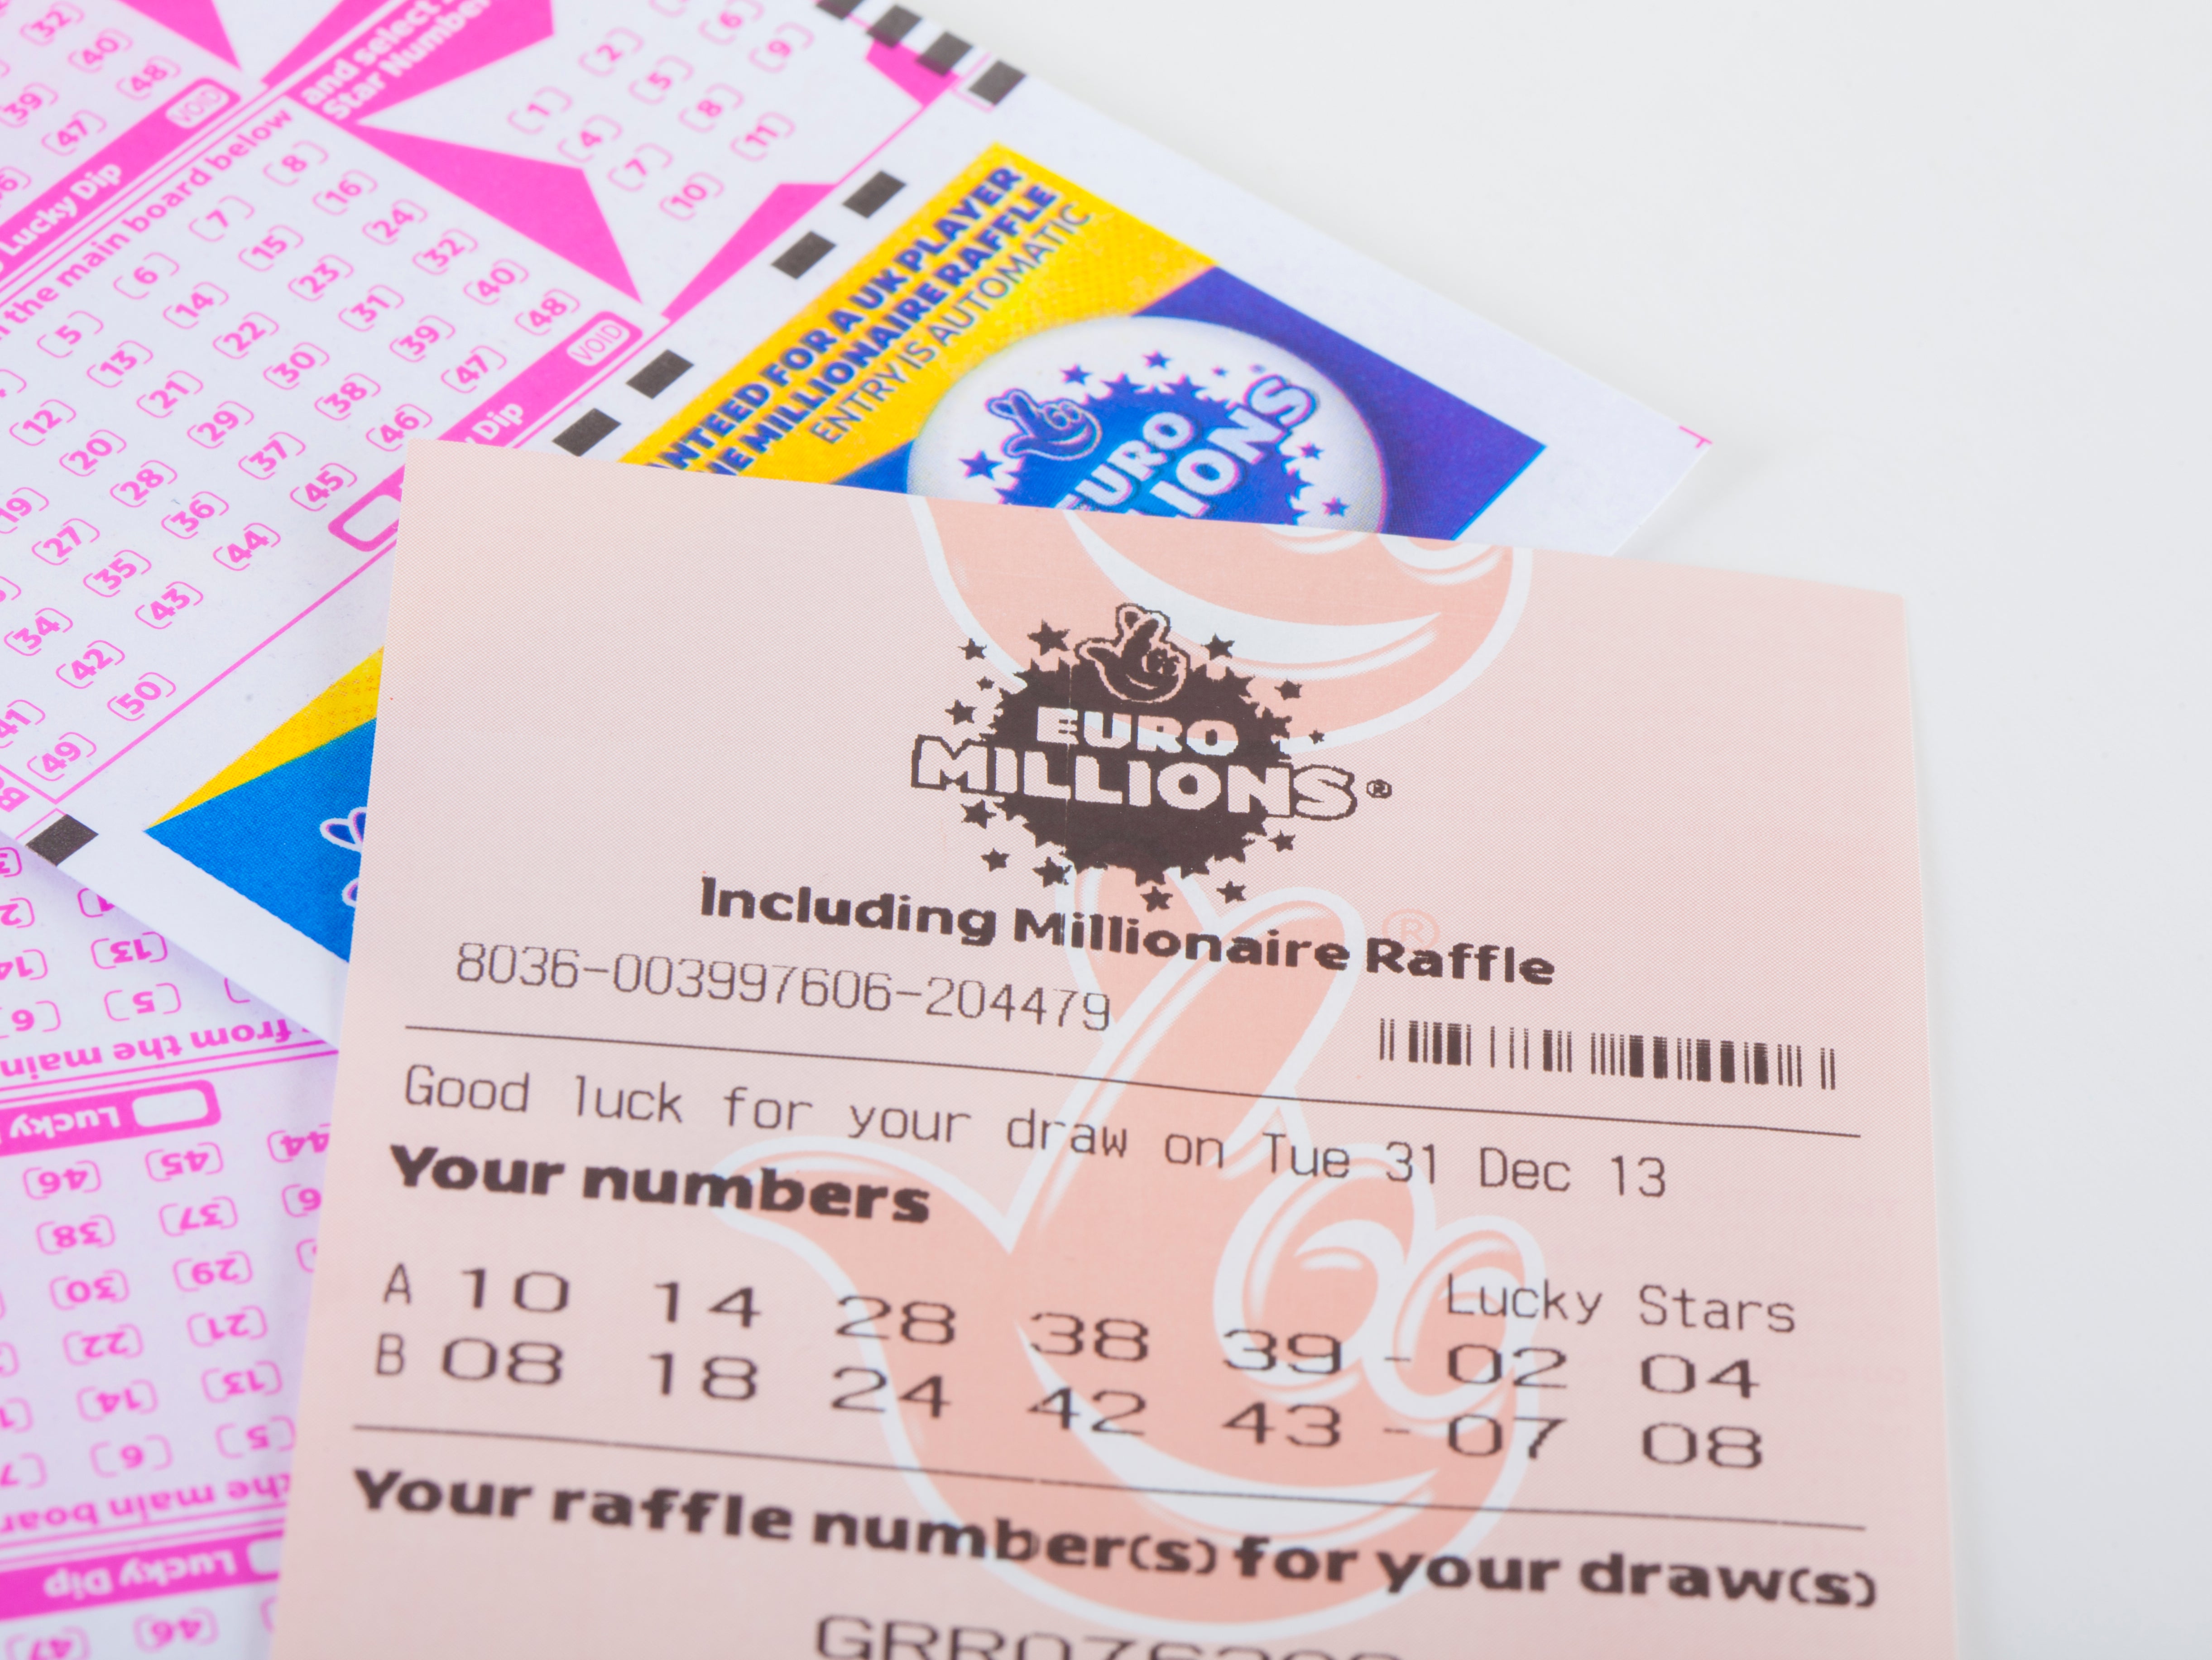 A UK ticket holder has come forward to claim a £110,978,200.90 EuroMillions jackpot prize